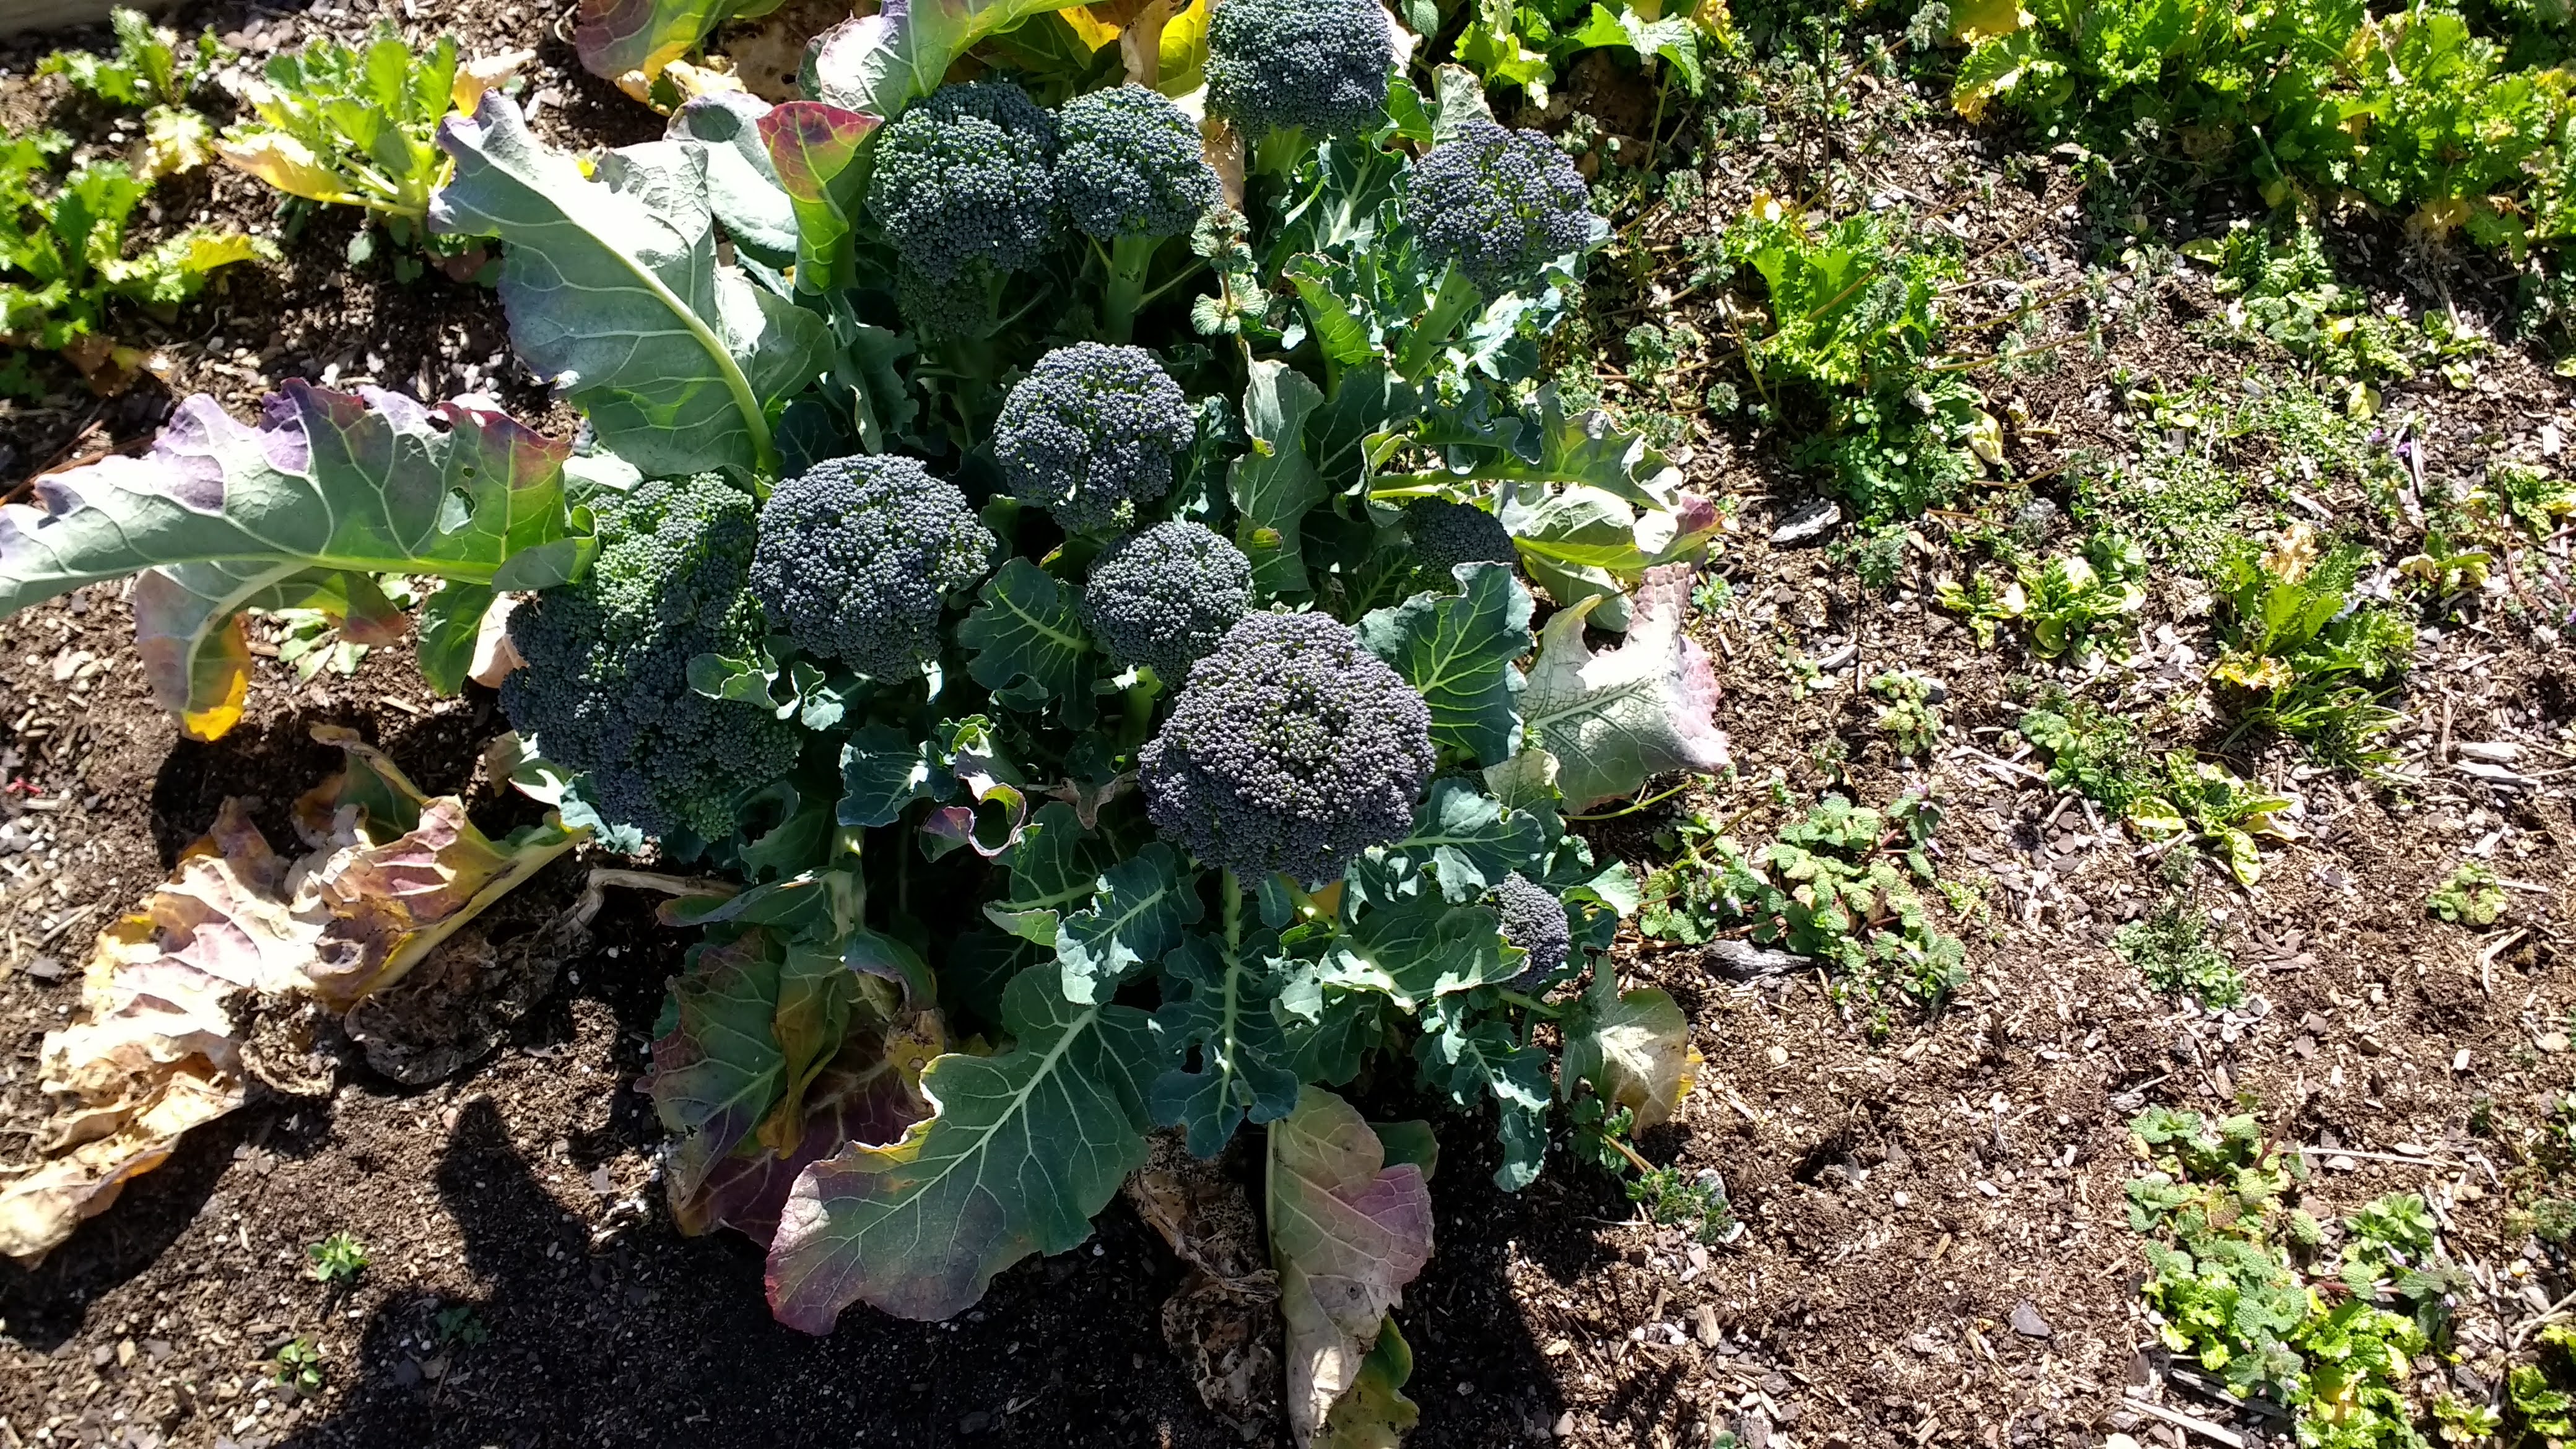 "8-12 weeks after seeding, you will have a healthy harvest of leafy greens like broccoli and kale"